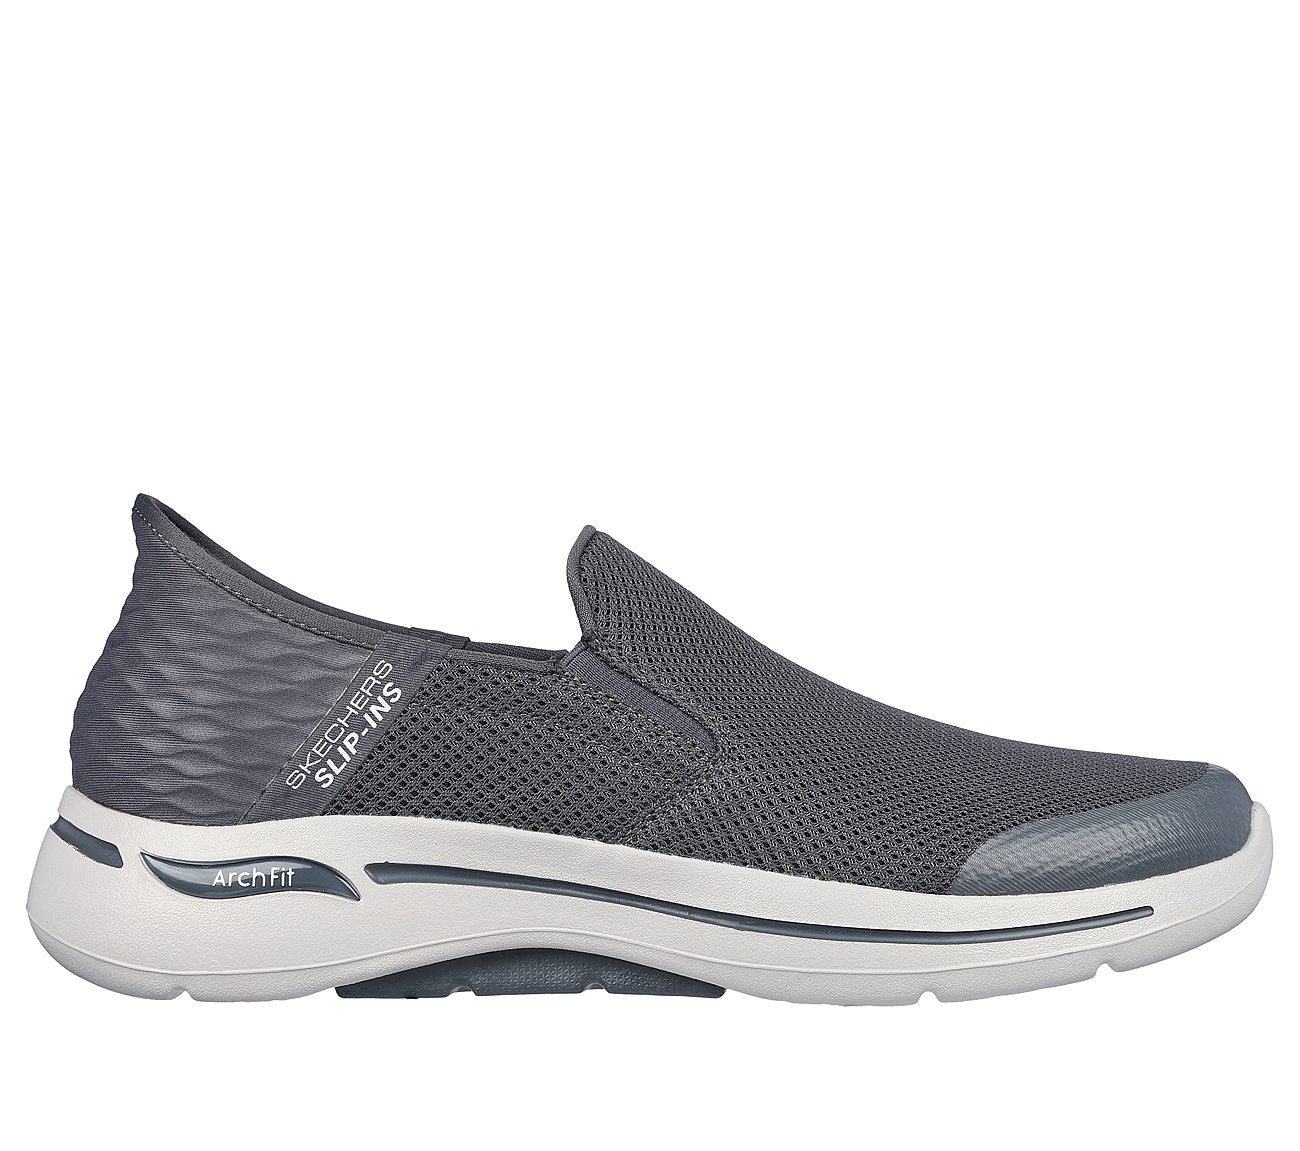 Skechers Charcoal Go Walk Arch Fit Hands Free Mens Walking Shoes Style ...